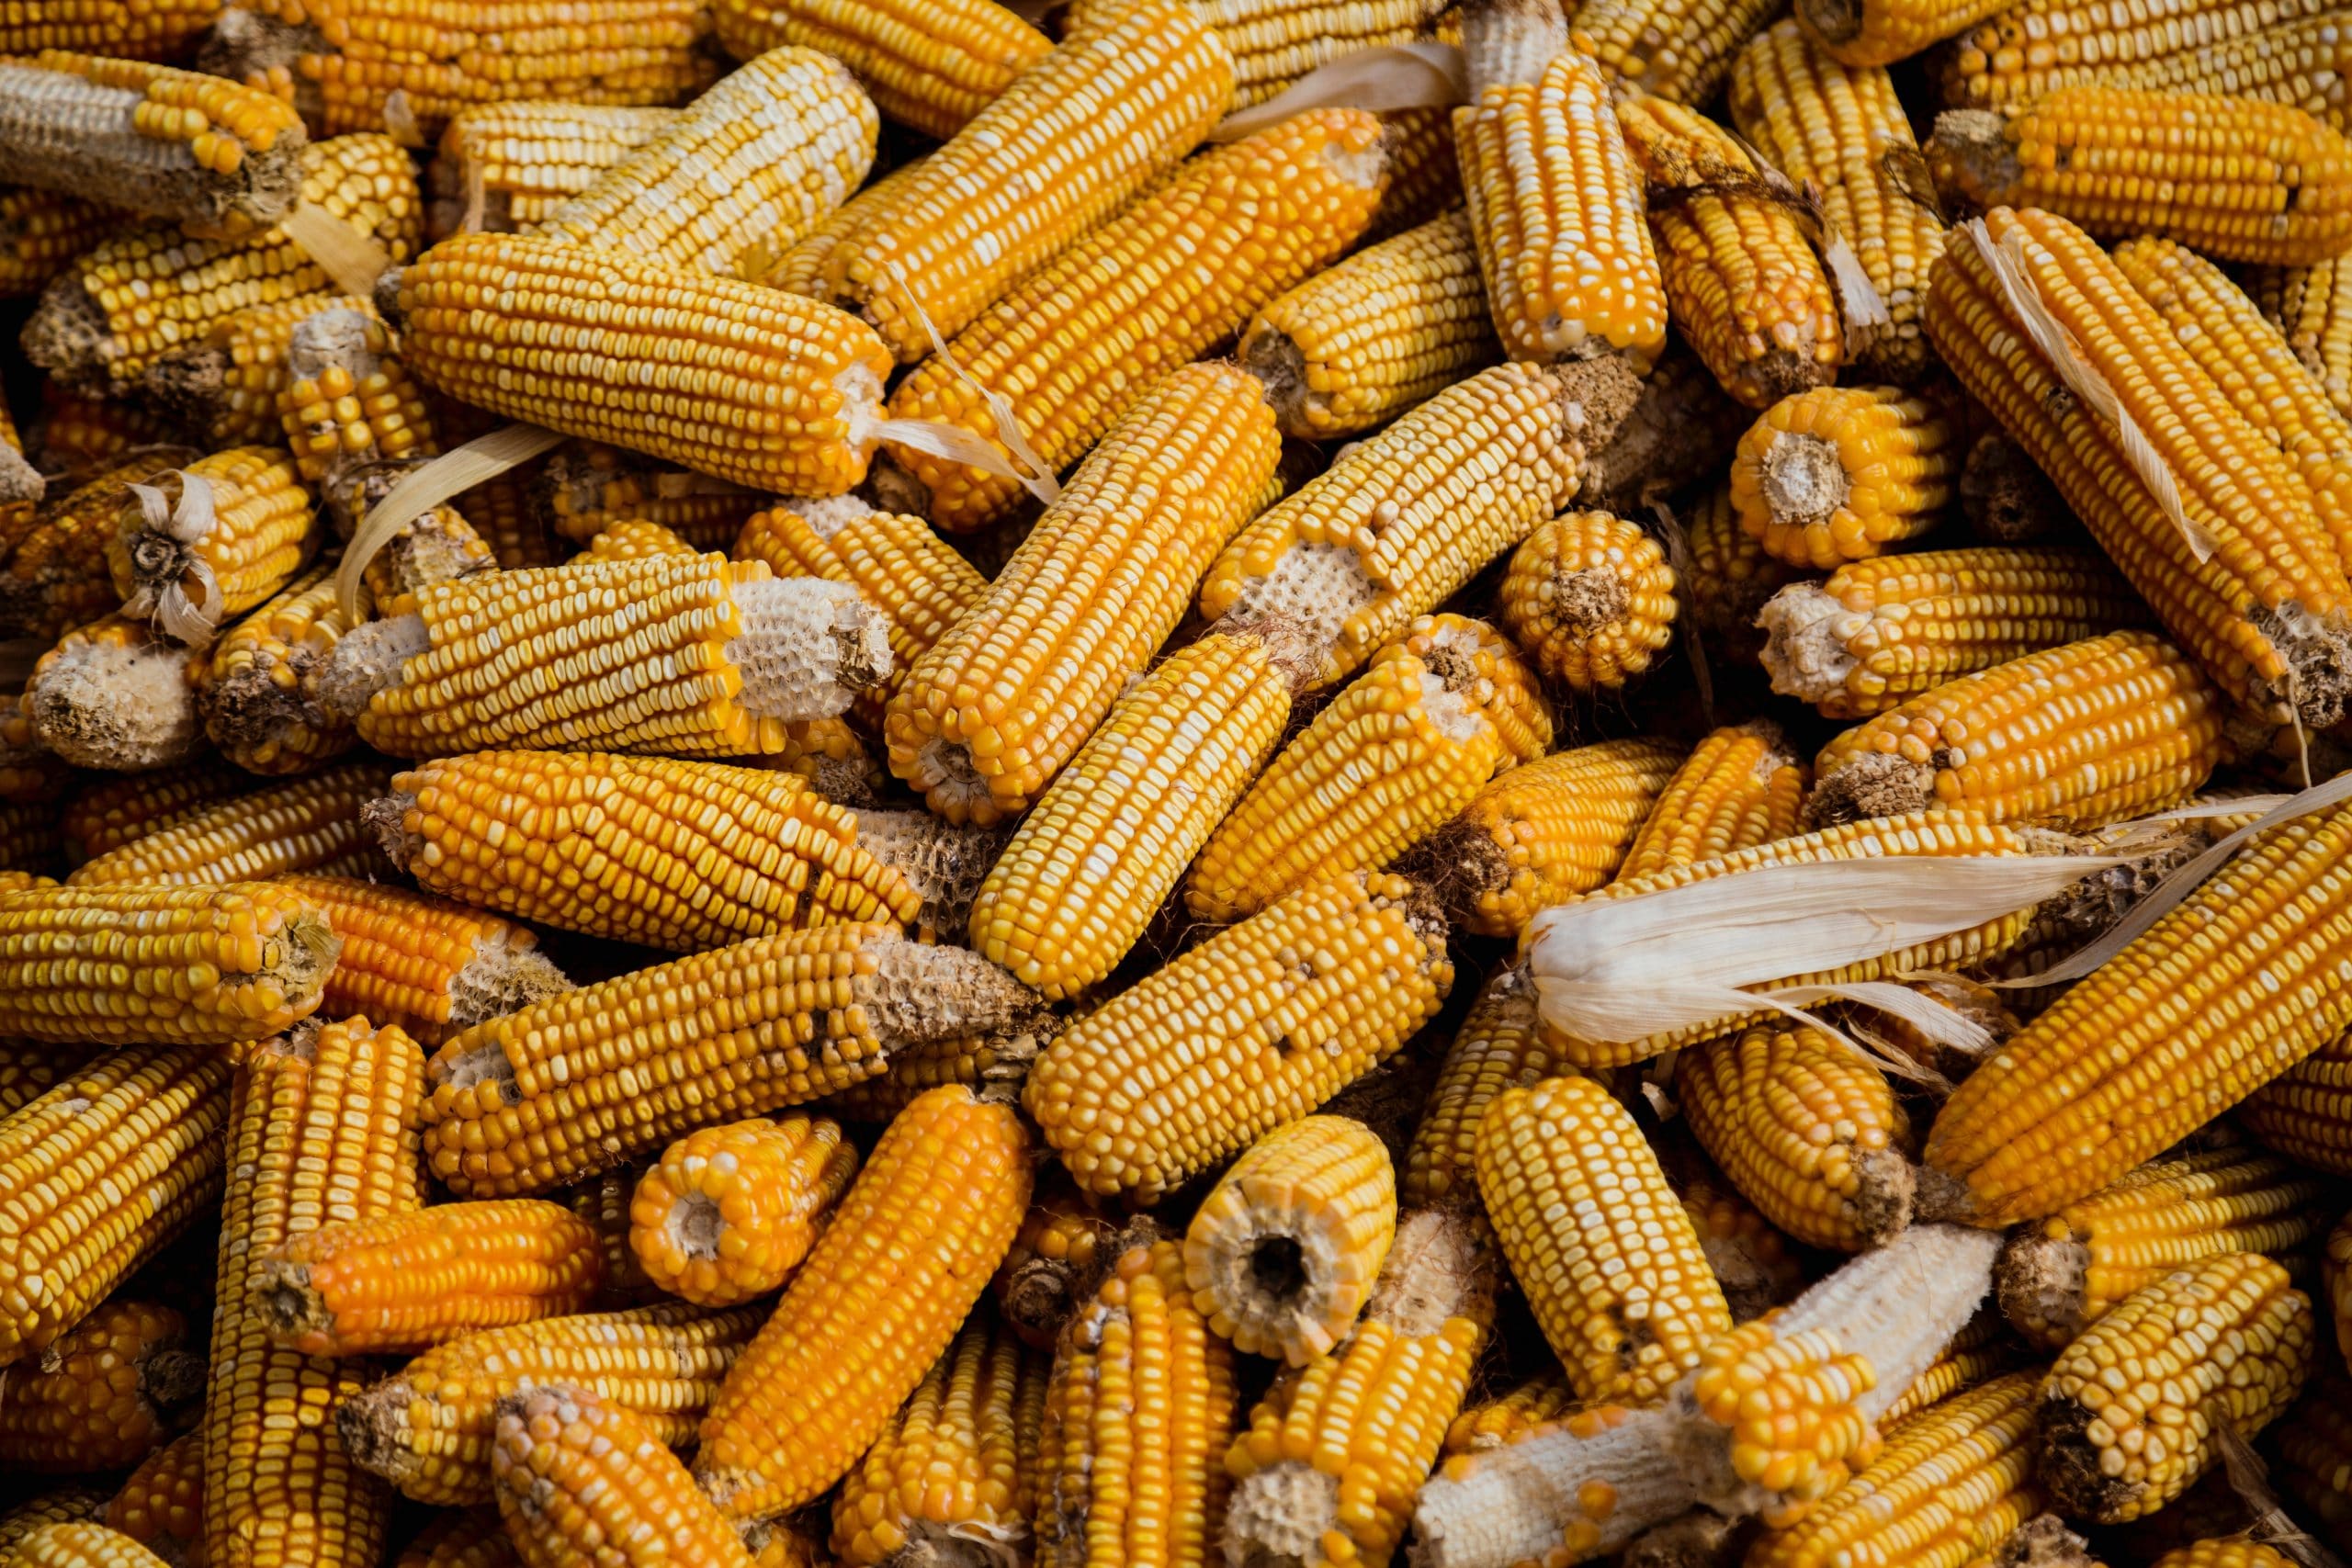 The Signs of Corn Spoilage